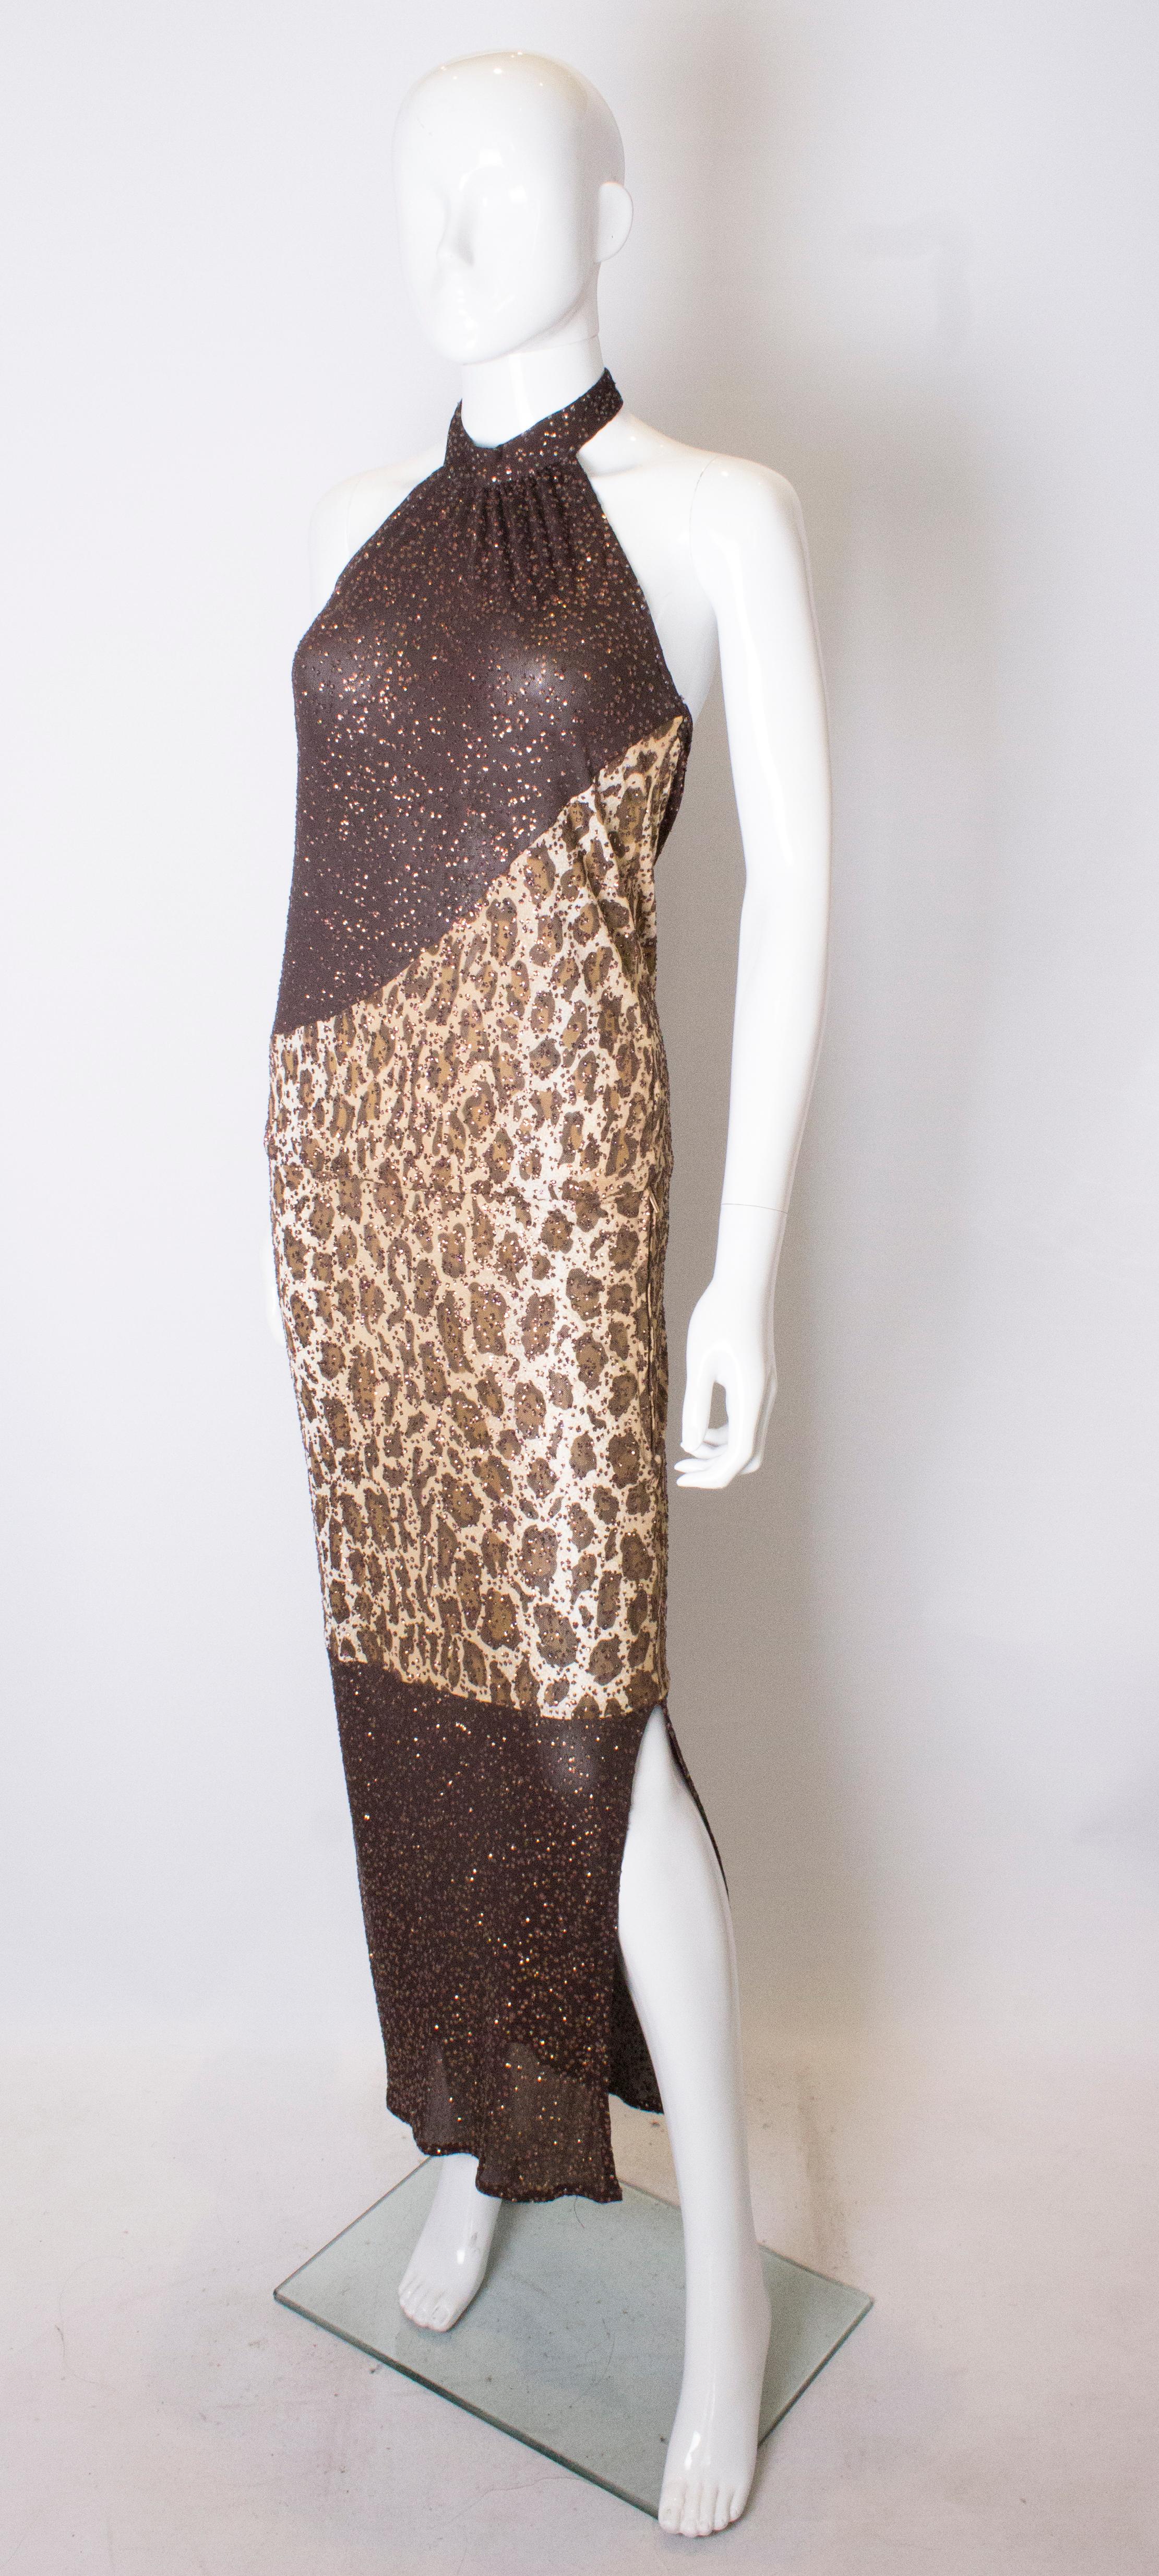 A great dress for Summer, by Angelo Tarlazzi, Paris. The dress is in an animal print with metallic embellishment. It has a halter neck, side zip opening and 18'' slit on one side.